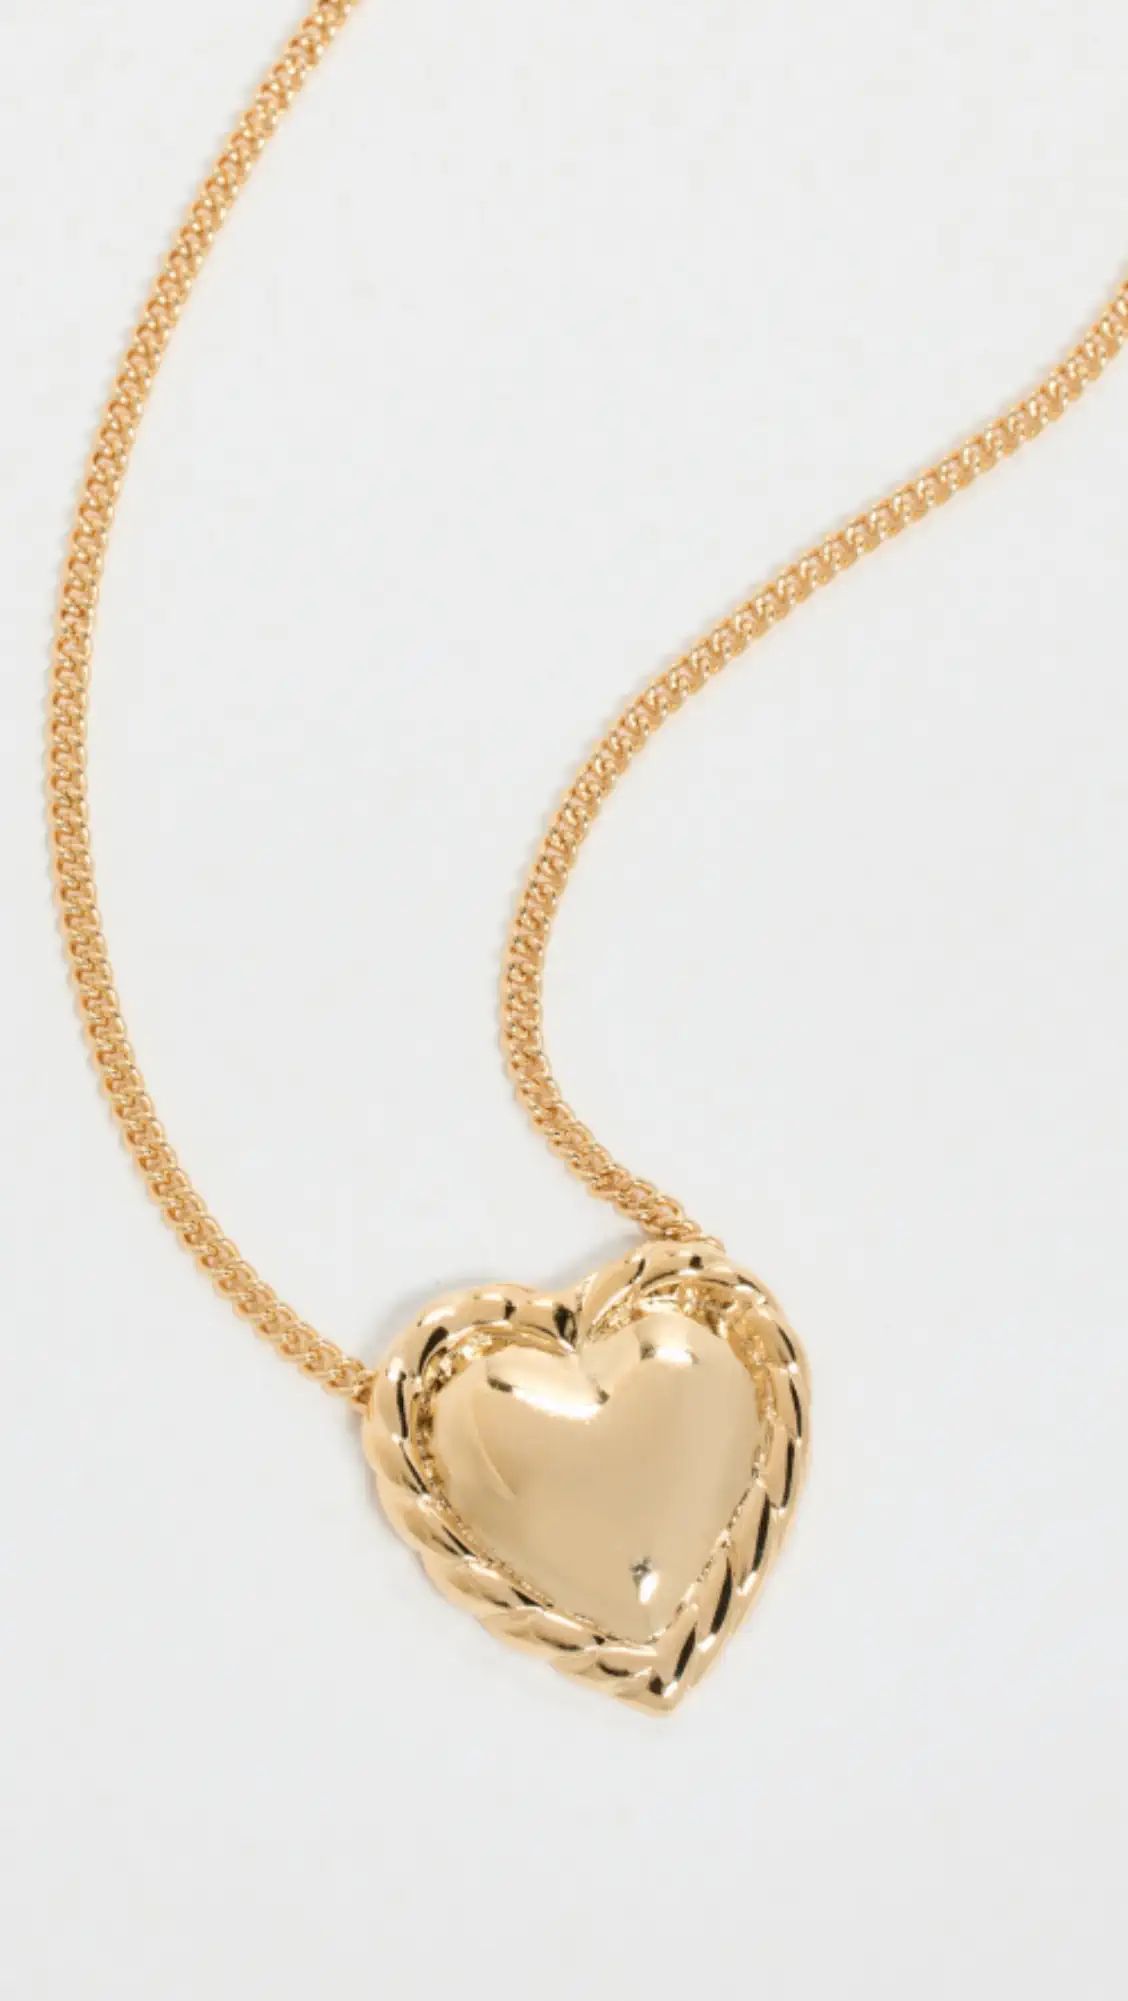 Gold Chain with Heart Pendant Necklace | Shopbop